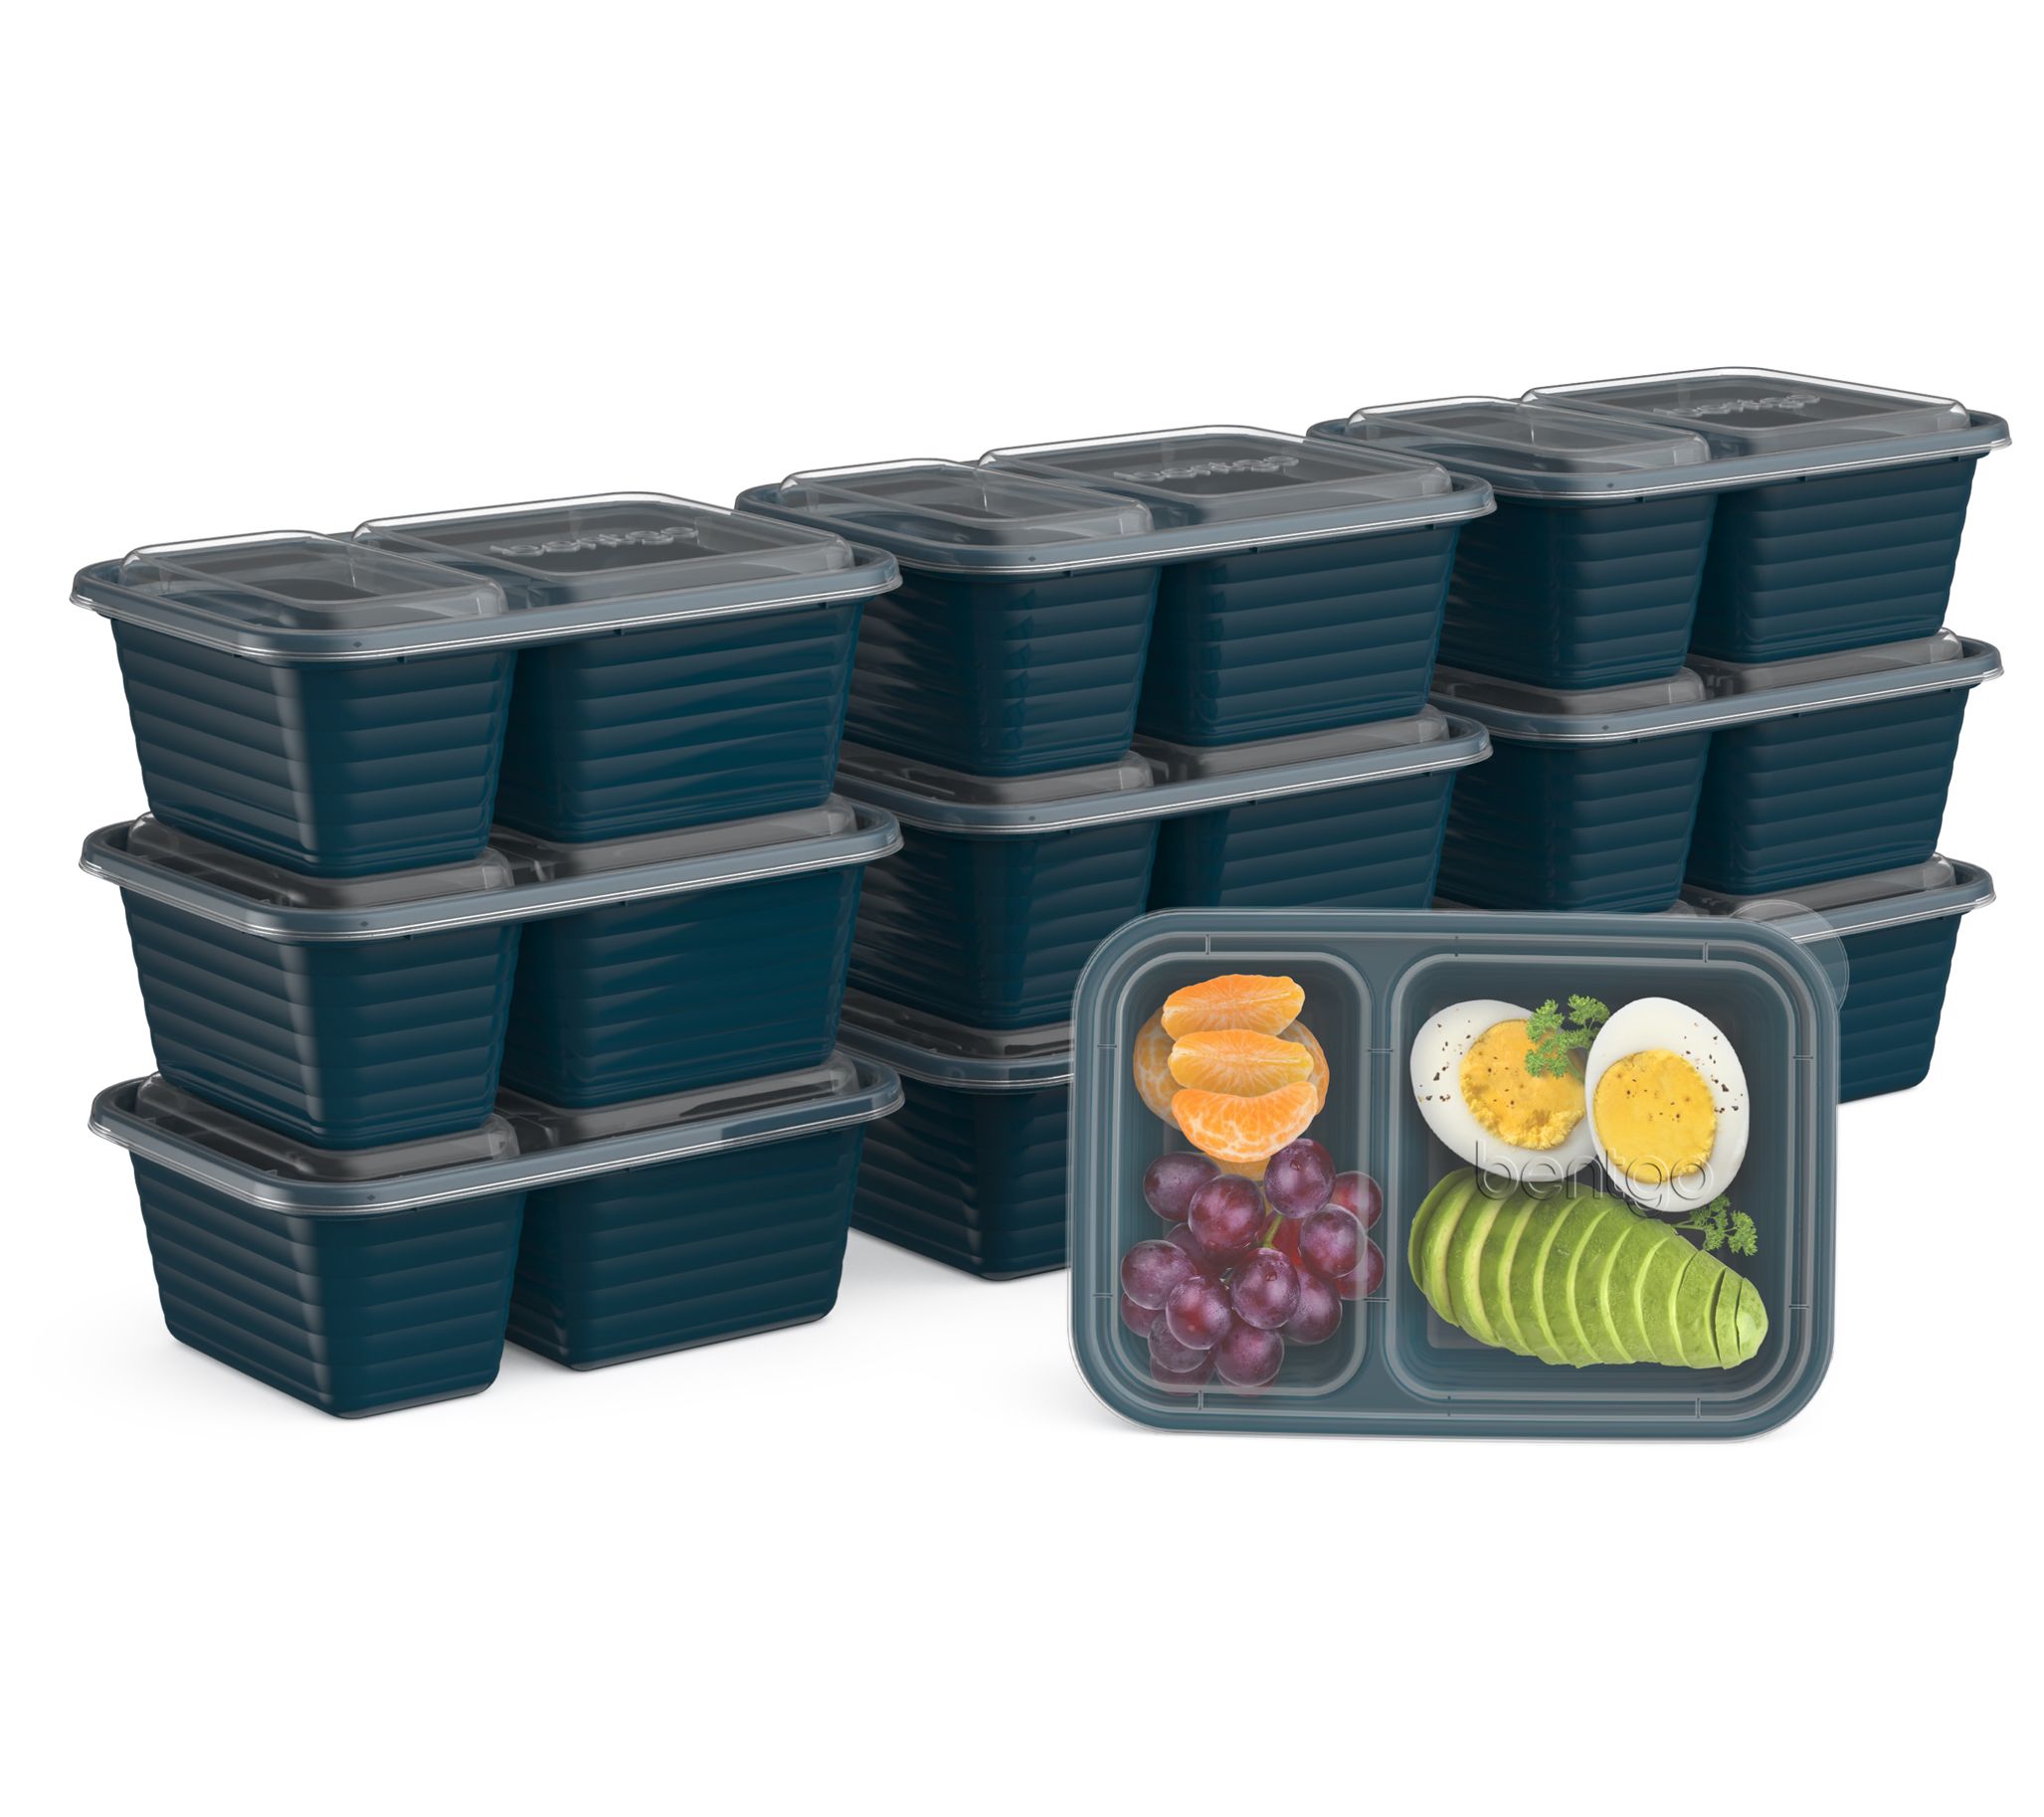 Bento Lunch Box Meal Prep Containers (3 Pack, 39 OZ) - 3 Removable